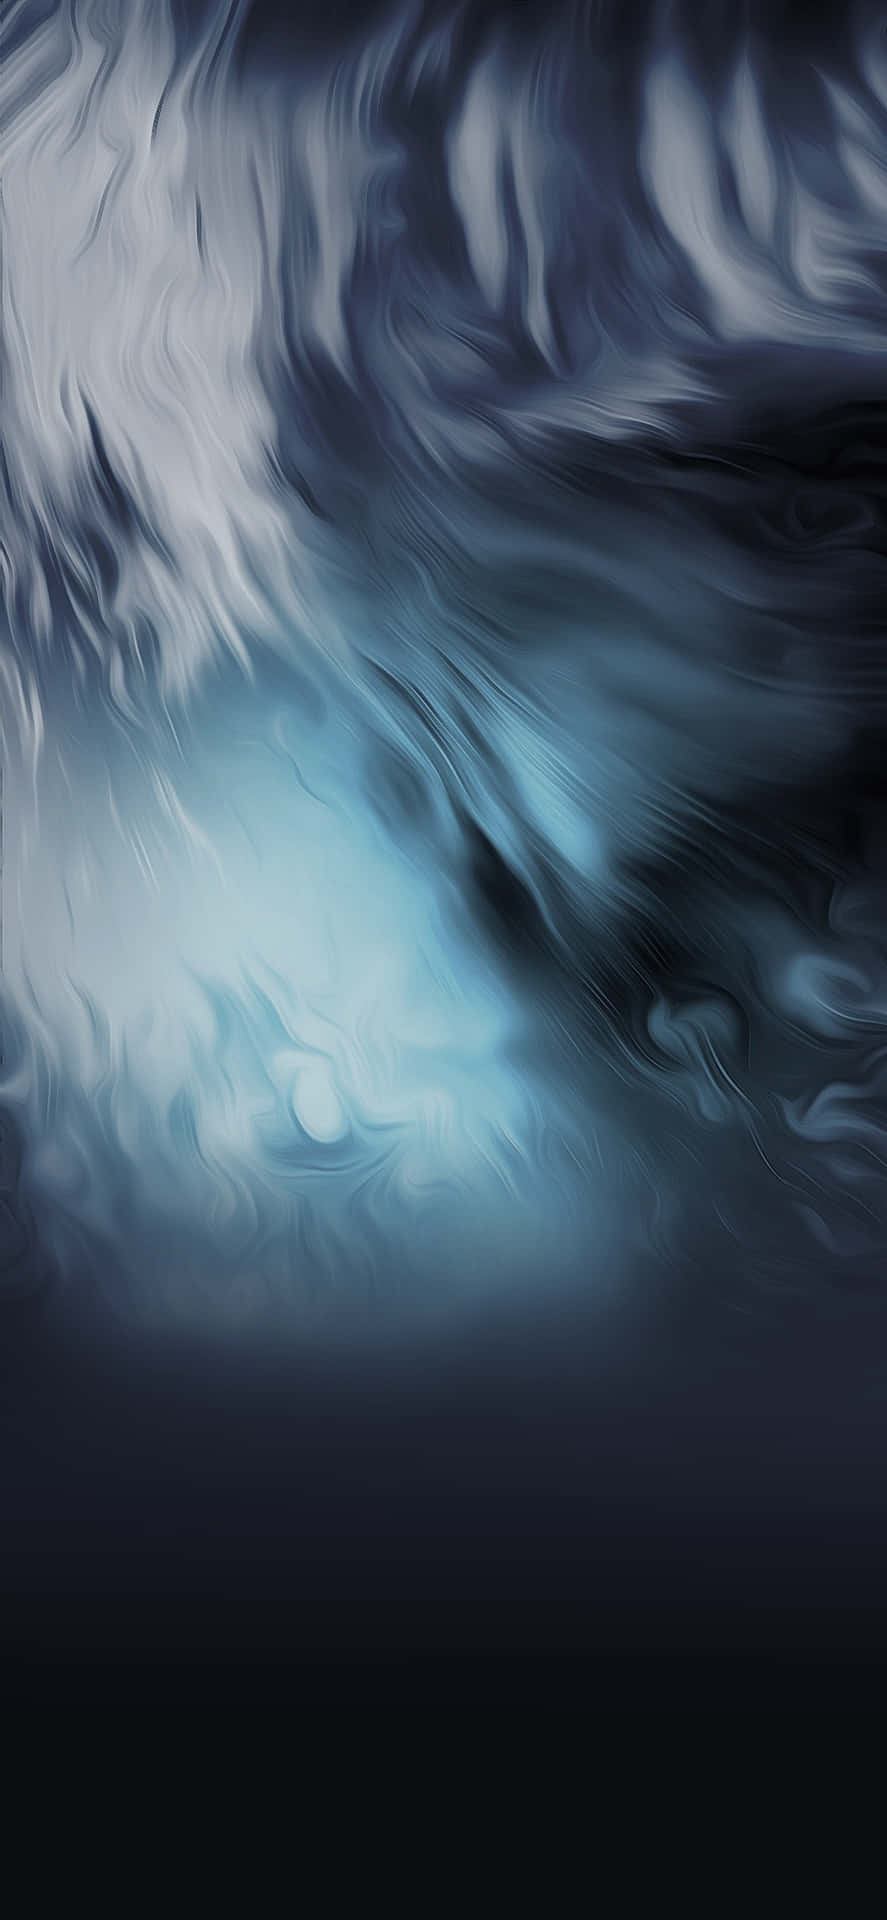 Iphone X Abstract White Smoke Fluid Wallpaper